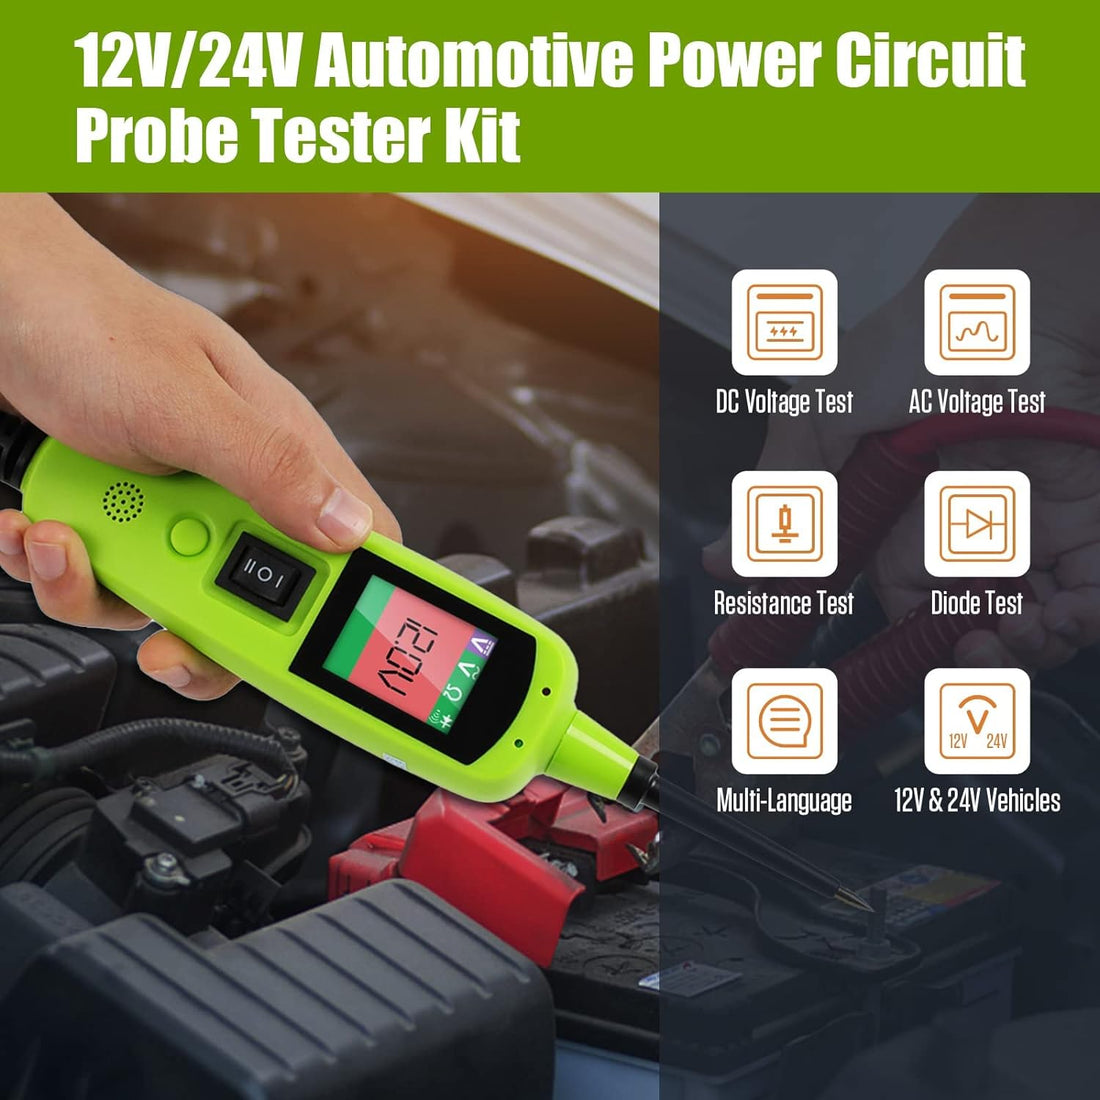 6-24-30v Power Circuit Probe Kit - BELEY Automotive Circuit Tester with Vehicle Tracer & Short/Open Finder for Battery Testing, Headlight Testing, Brake Light Testing etc.(33ft Extension Cables)